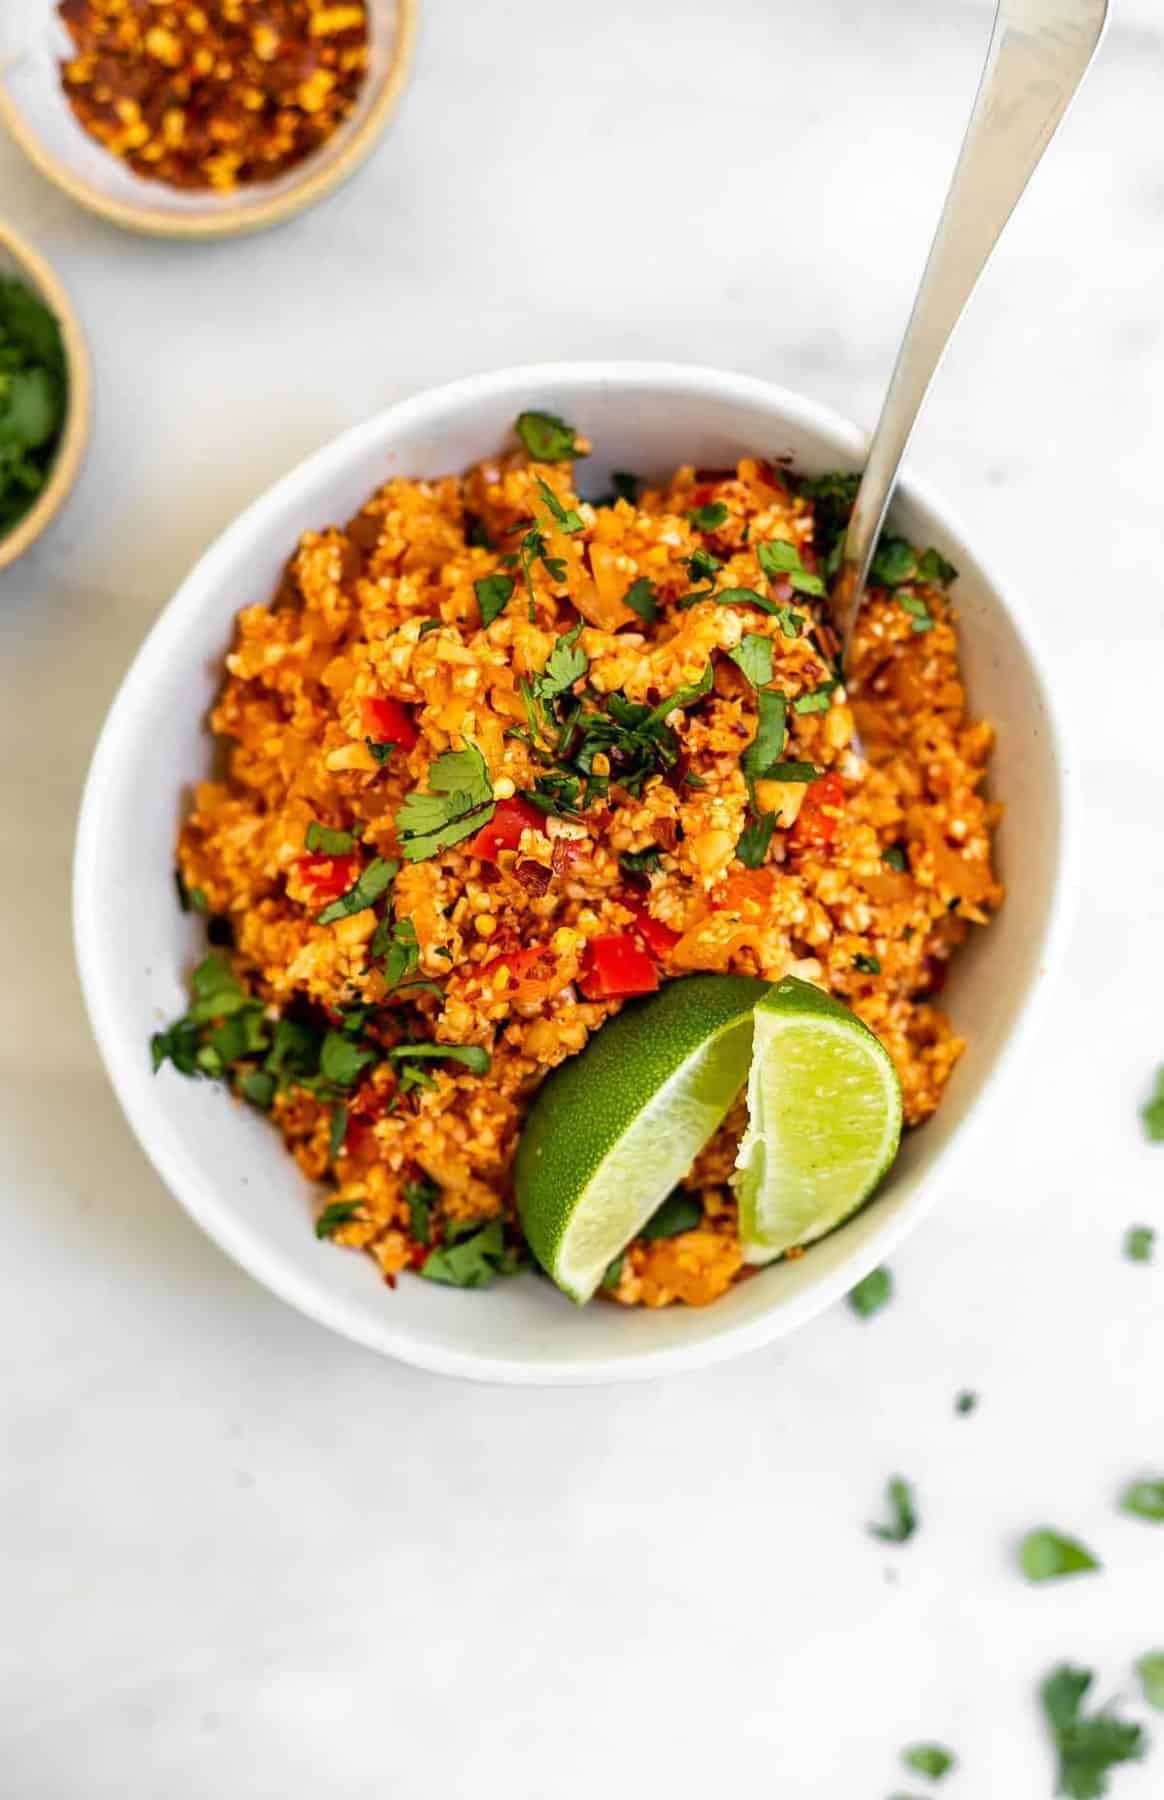 Mexican cauliflower rice in a bowl with red pepper flakes on the side.